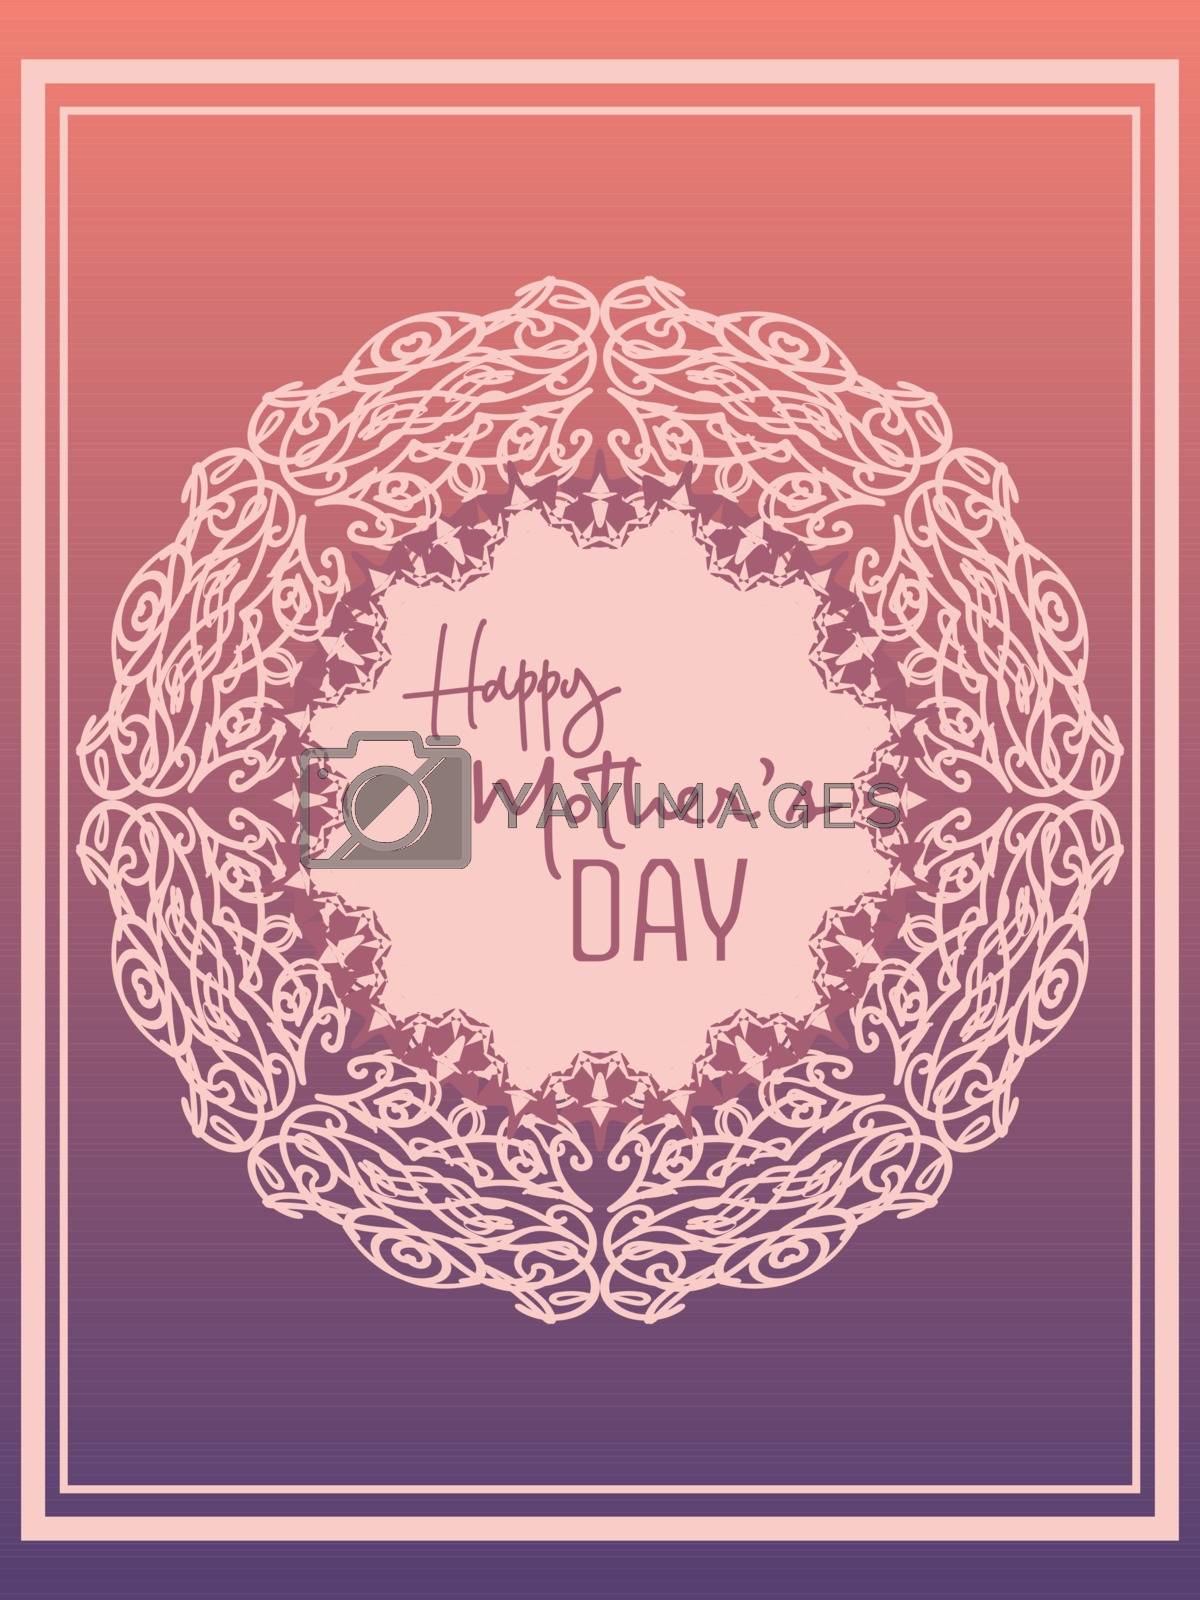 Royalty free image of elegant pink greeting card for mother's day by paranoido